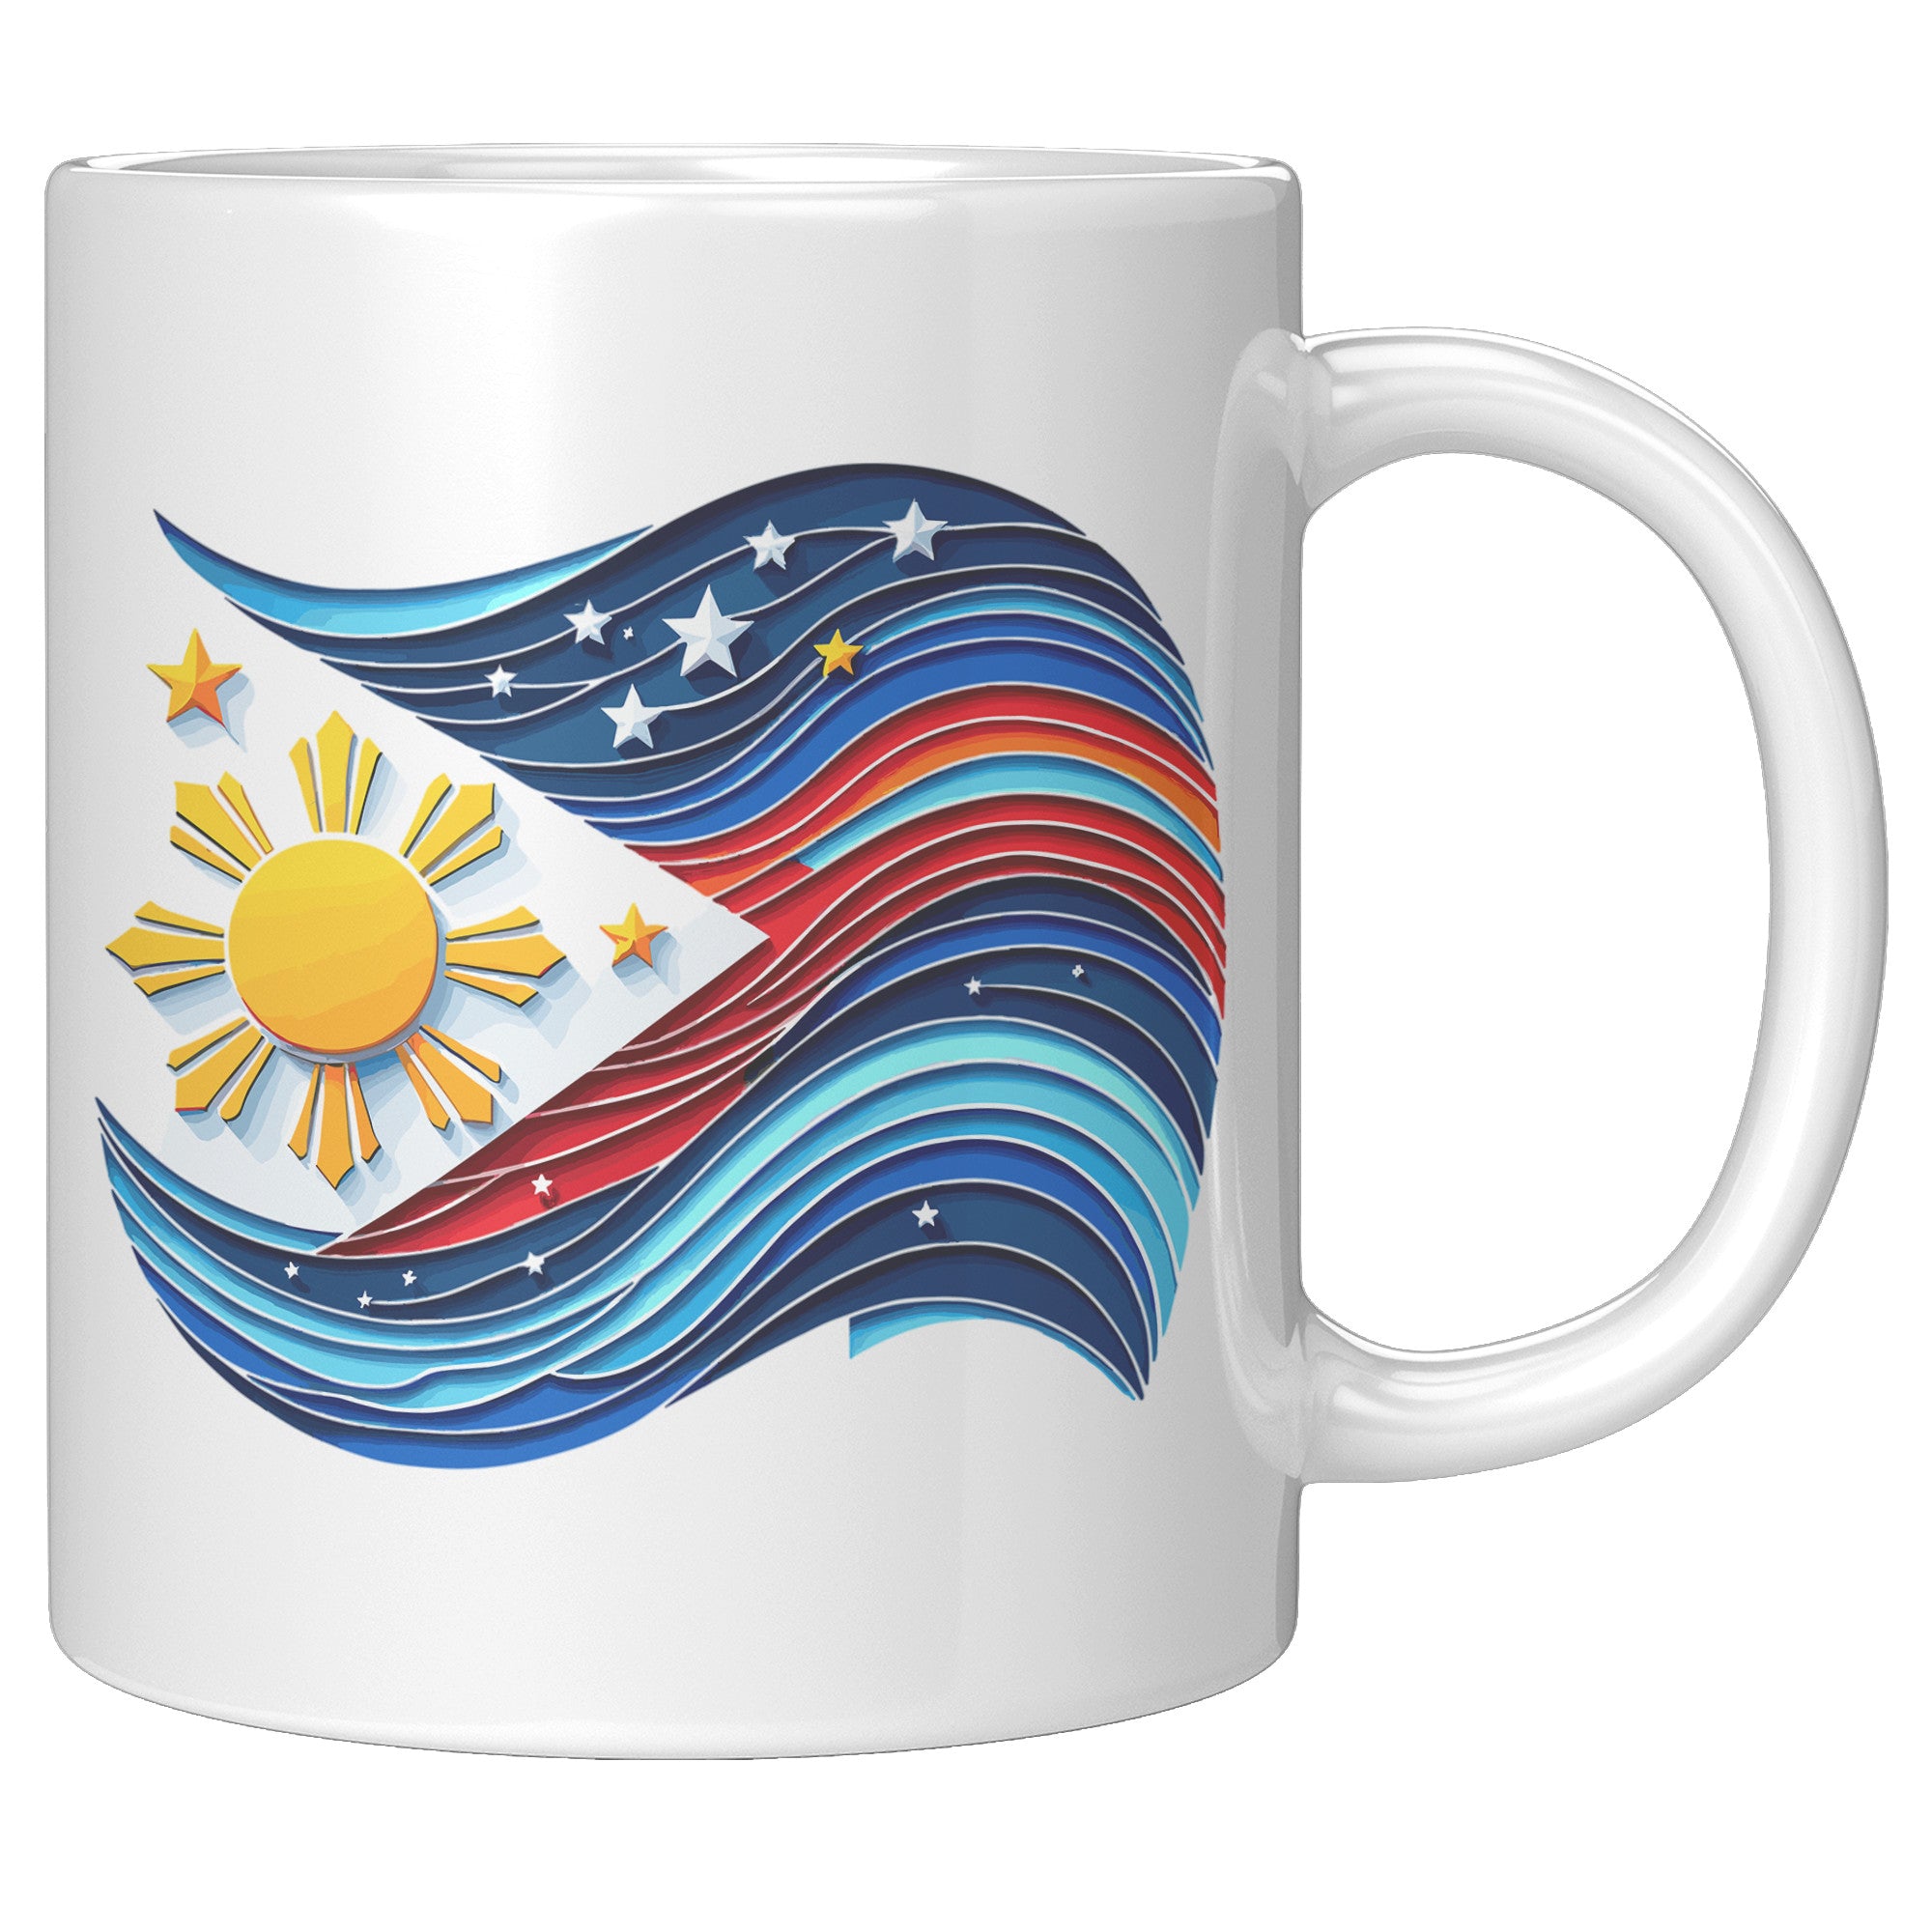 Proudly Pinoy Coffee Mug - Vibrant Filipino Flag Design - Patriotic Gift for Filipinos - Celebrate Heritage with Every Sip!" - K